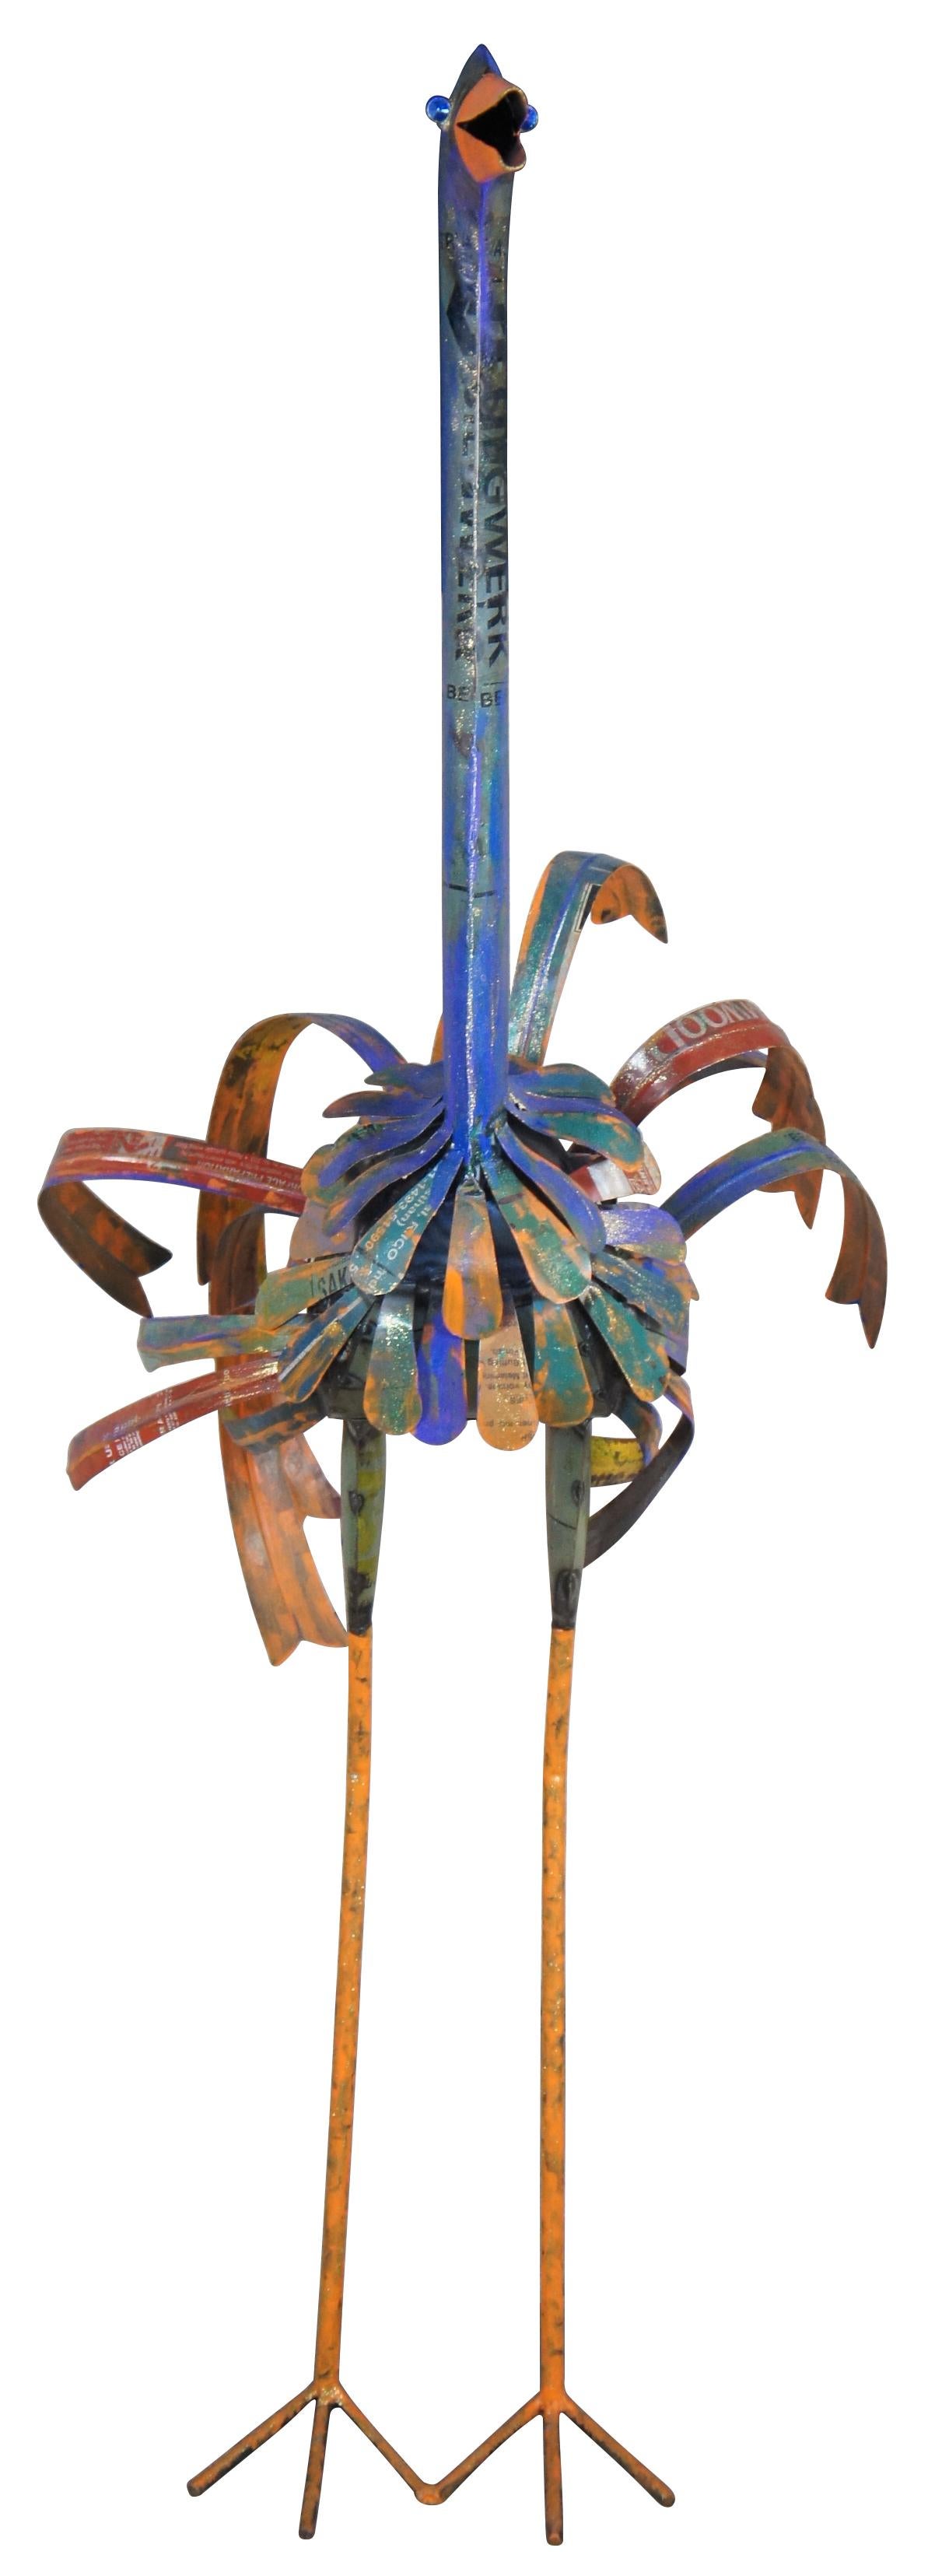 A unique and colorful sculptural crane or ostrich statue. Crafted from reclaimed iron and tin. Features a long purplish neck with orange beak, flowing feathers along the body and wrought iron orange legs and feet. Includes blue jeweled eyes.